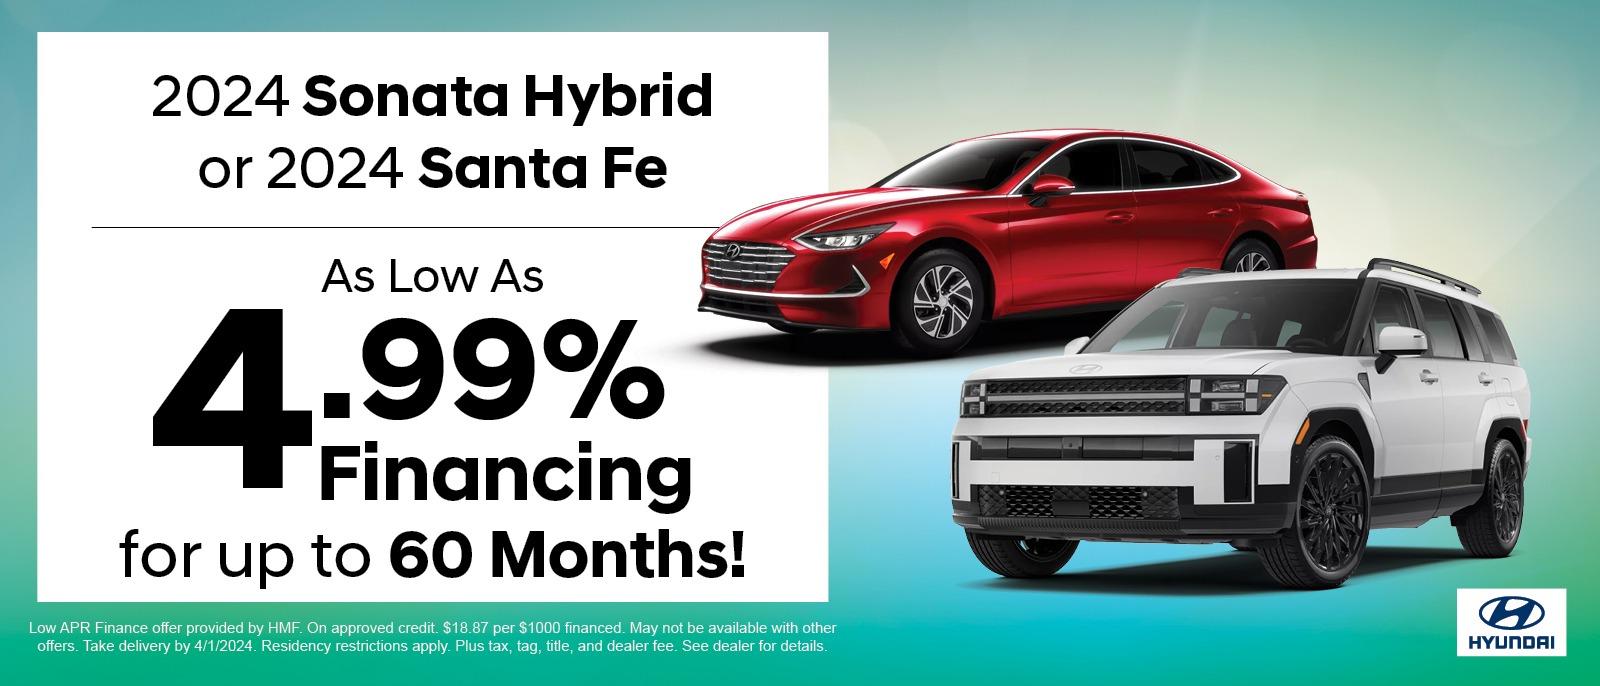 2024 Sonata Hybrid and Santa Fe as low as 4.99% financing for up to 60 months - View Inventory